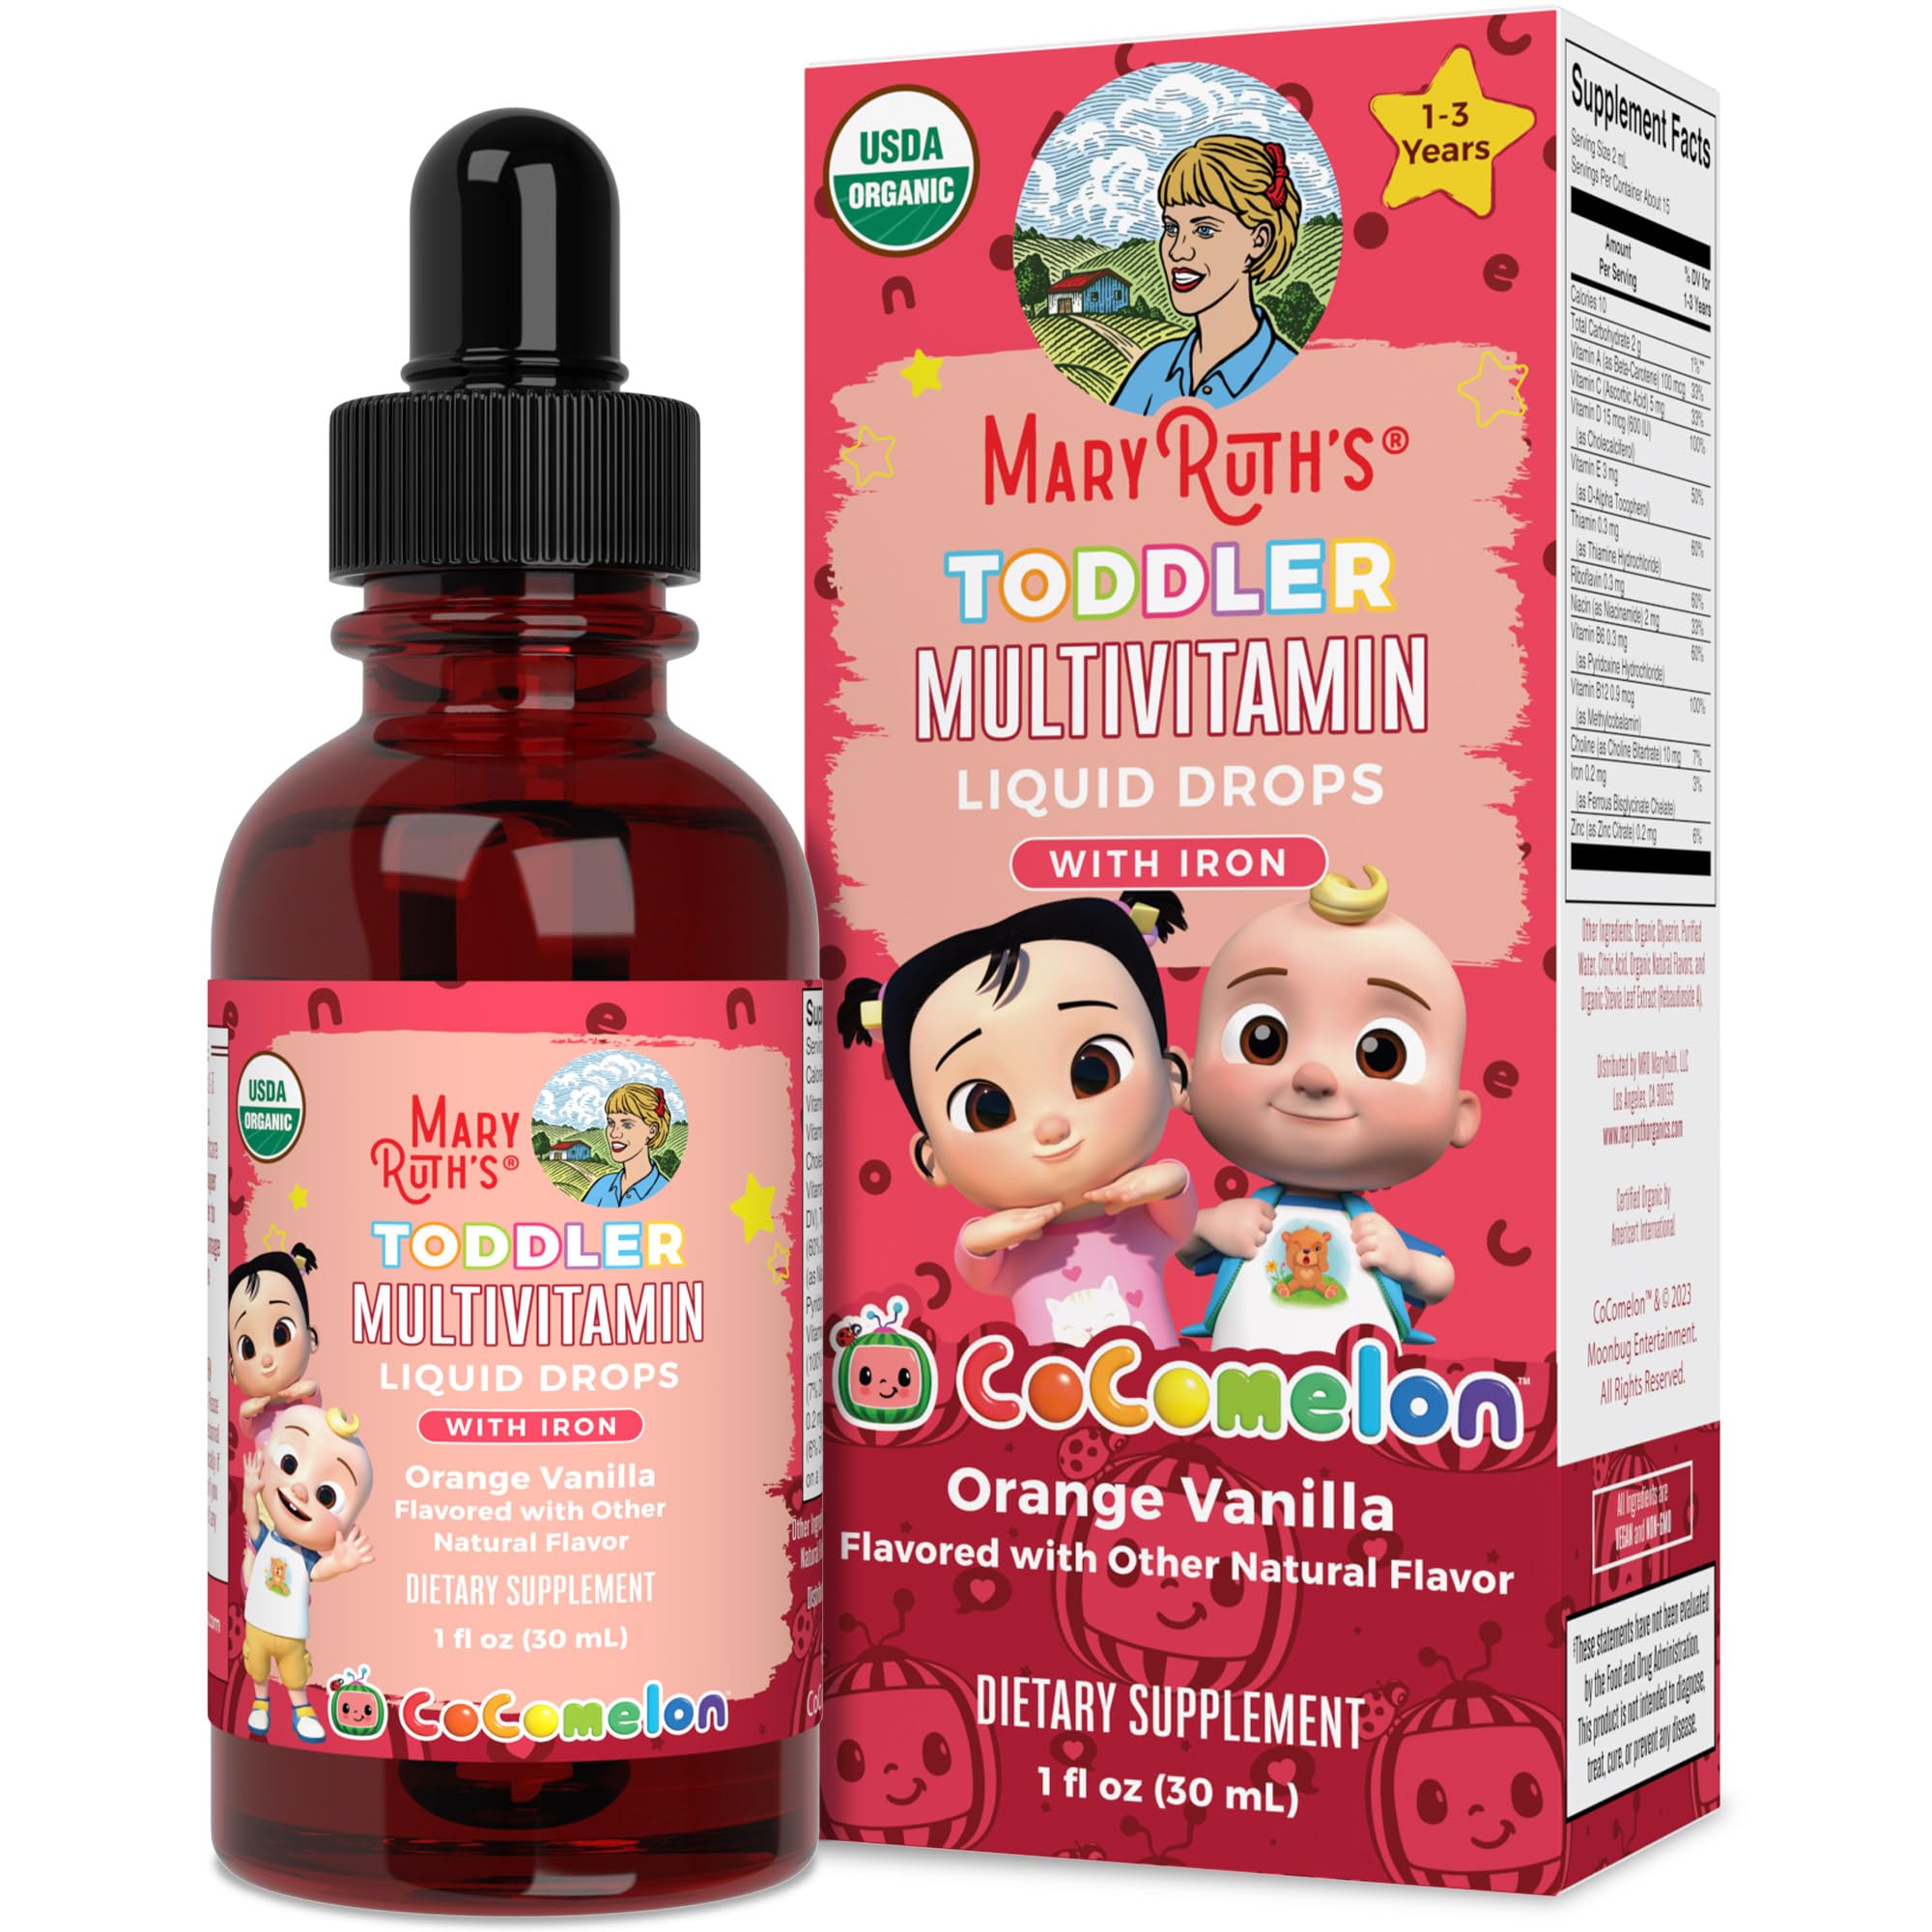 MaryRuth's Cocomelon Toddler Multivitamins + Iron, Cocomelon Toddler Vitamin C, and Cocomelon Toddler Ionic Zinc, 3-Pack Bundle for Immune Support, Brain Health, Skin Health and Overall Health, Vegan